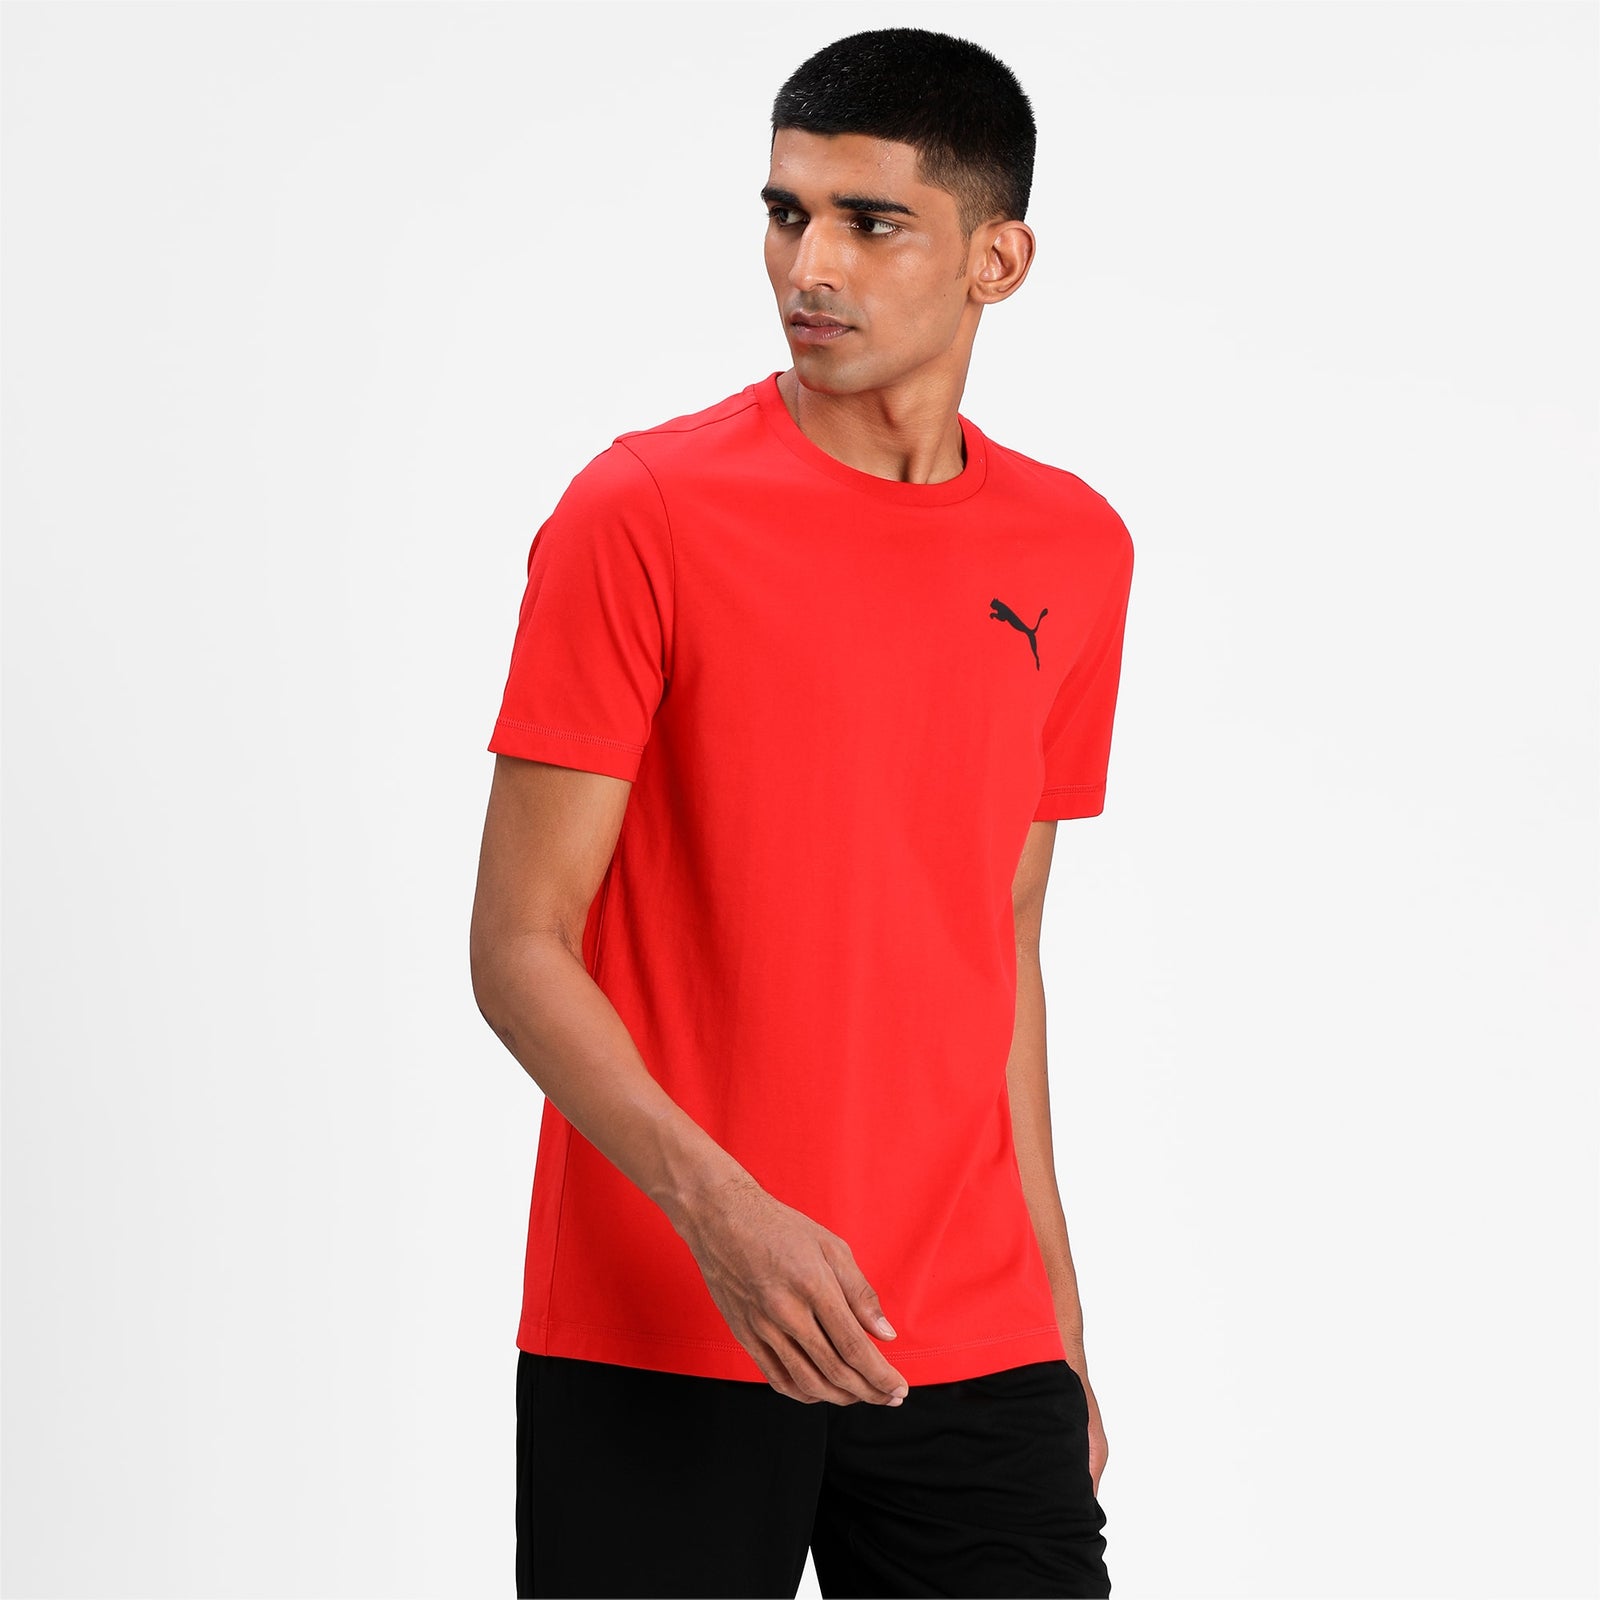 ACTIVE Soft Tee High Risk Red